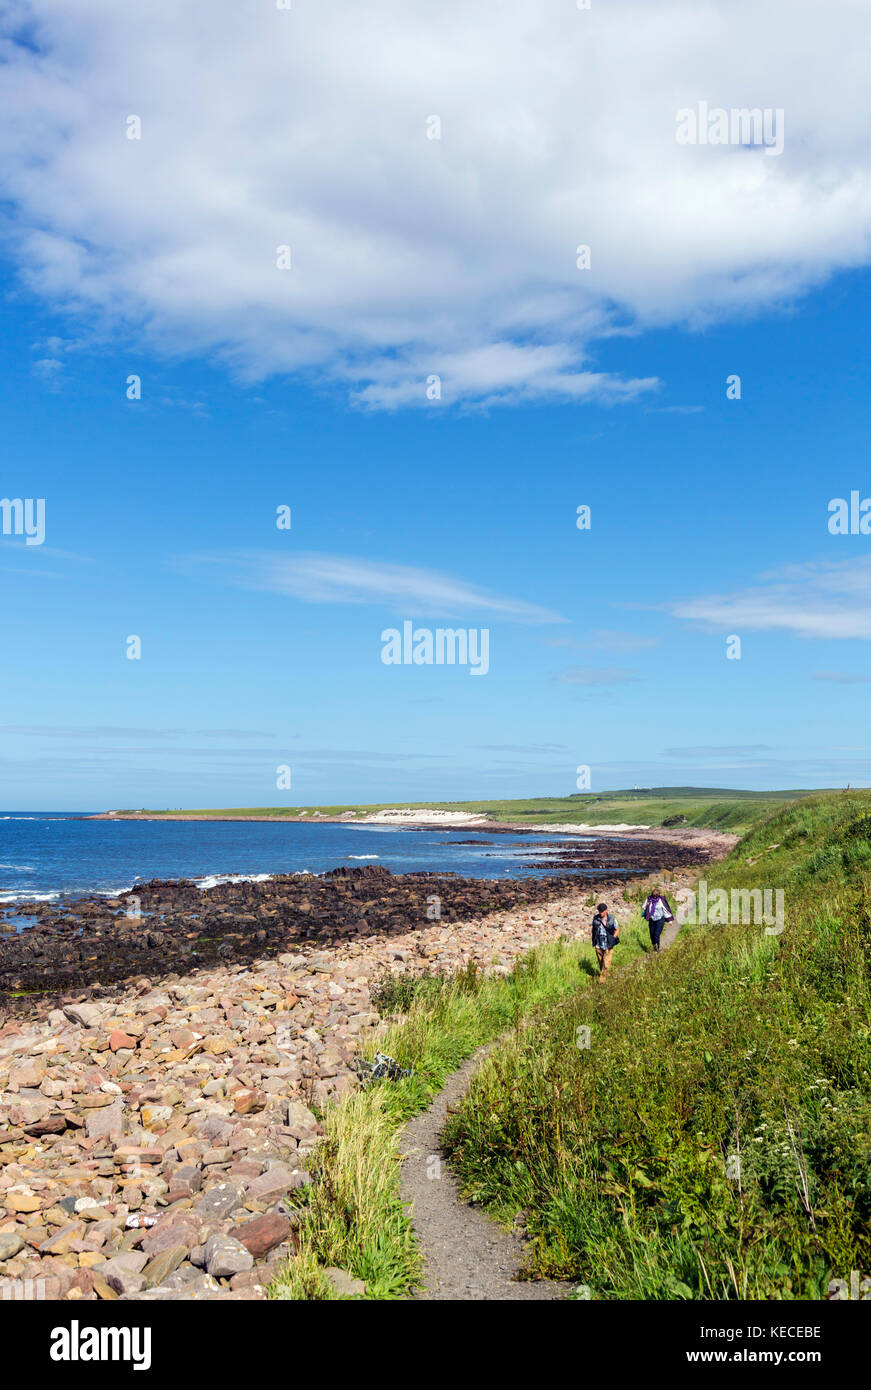 John O'Groats, Scotland. Walkers on footpath from John O'Groats to Duncansby Head, the actual most north easterly point in mainland UK. Stock Photo